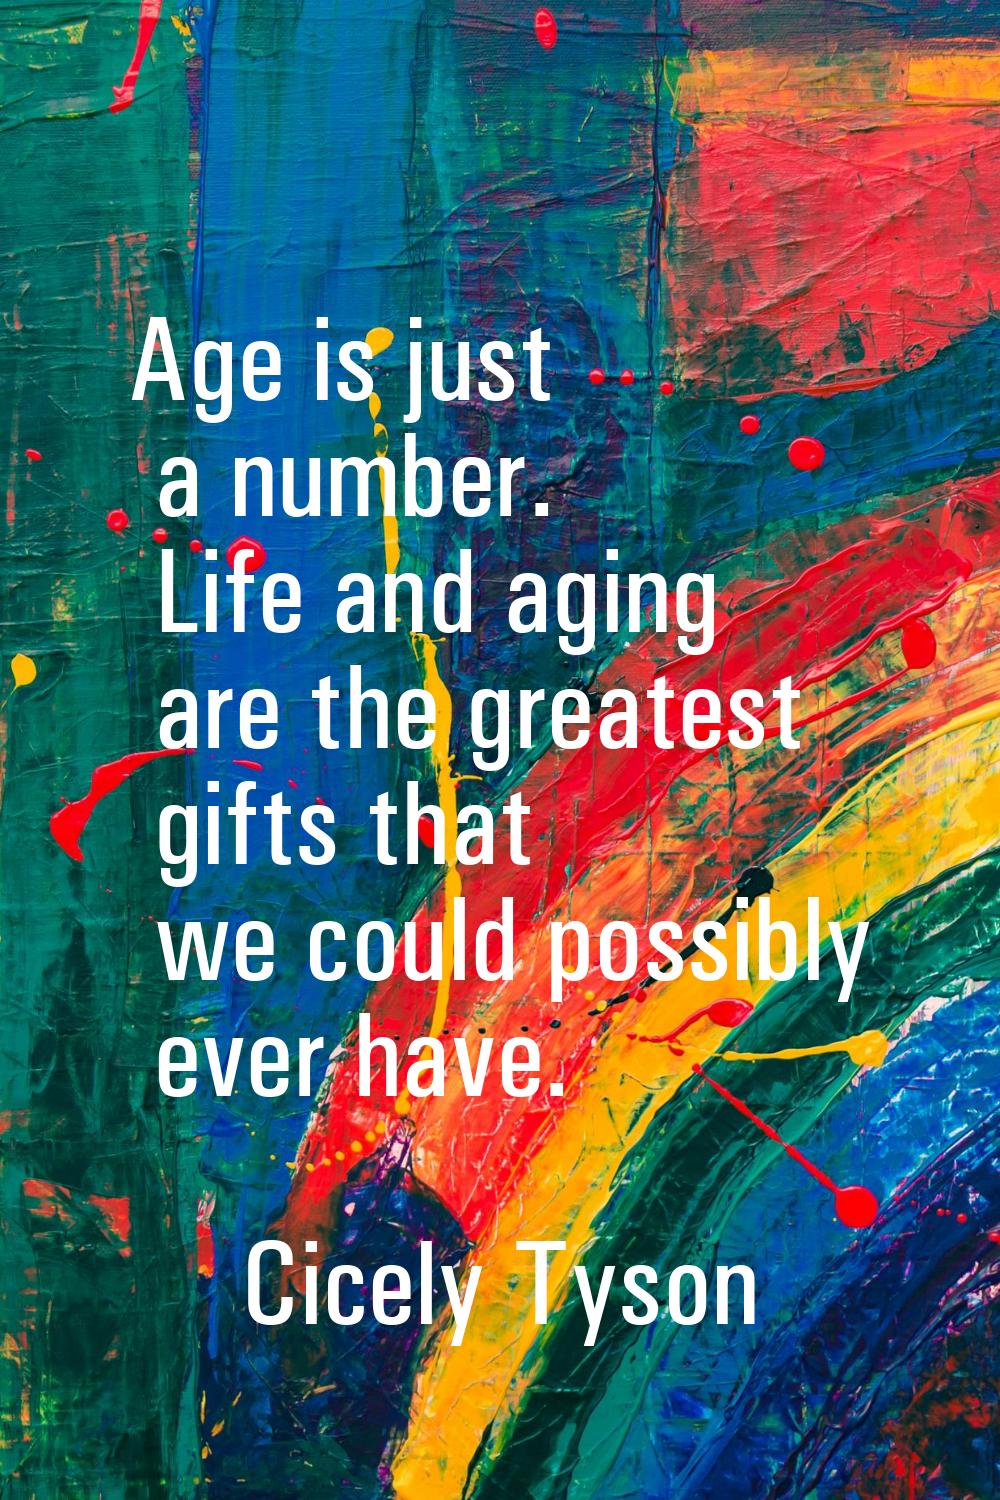 Age is just a number. Life and aging are the greatest gifts that we could possibly ever have.